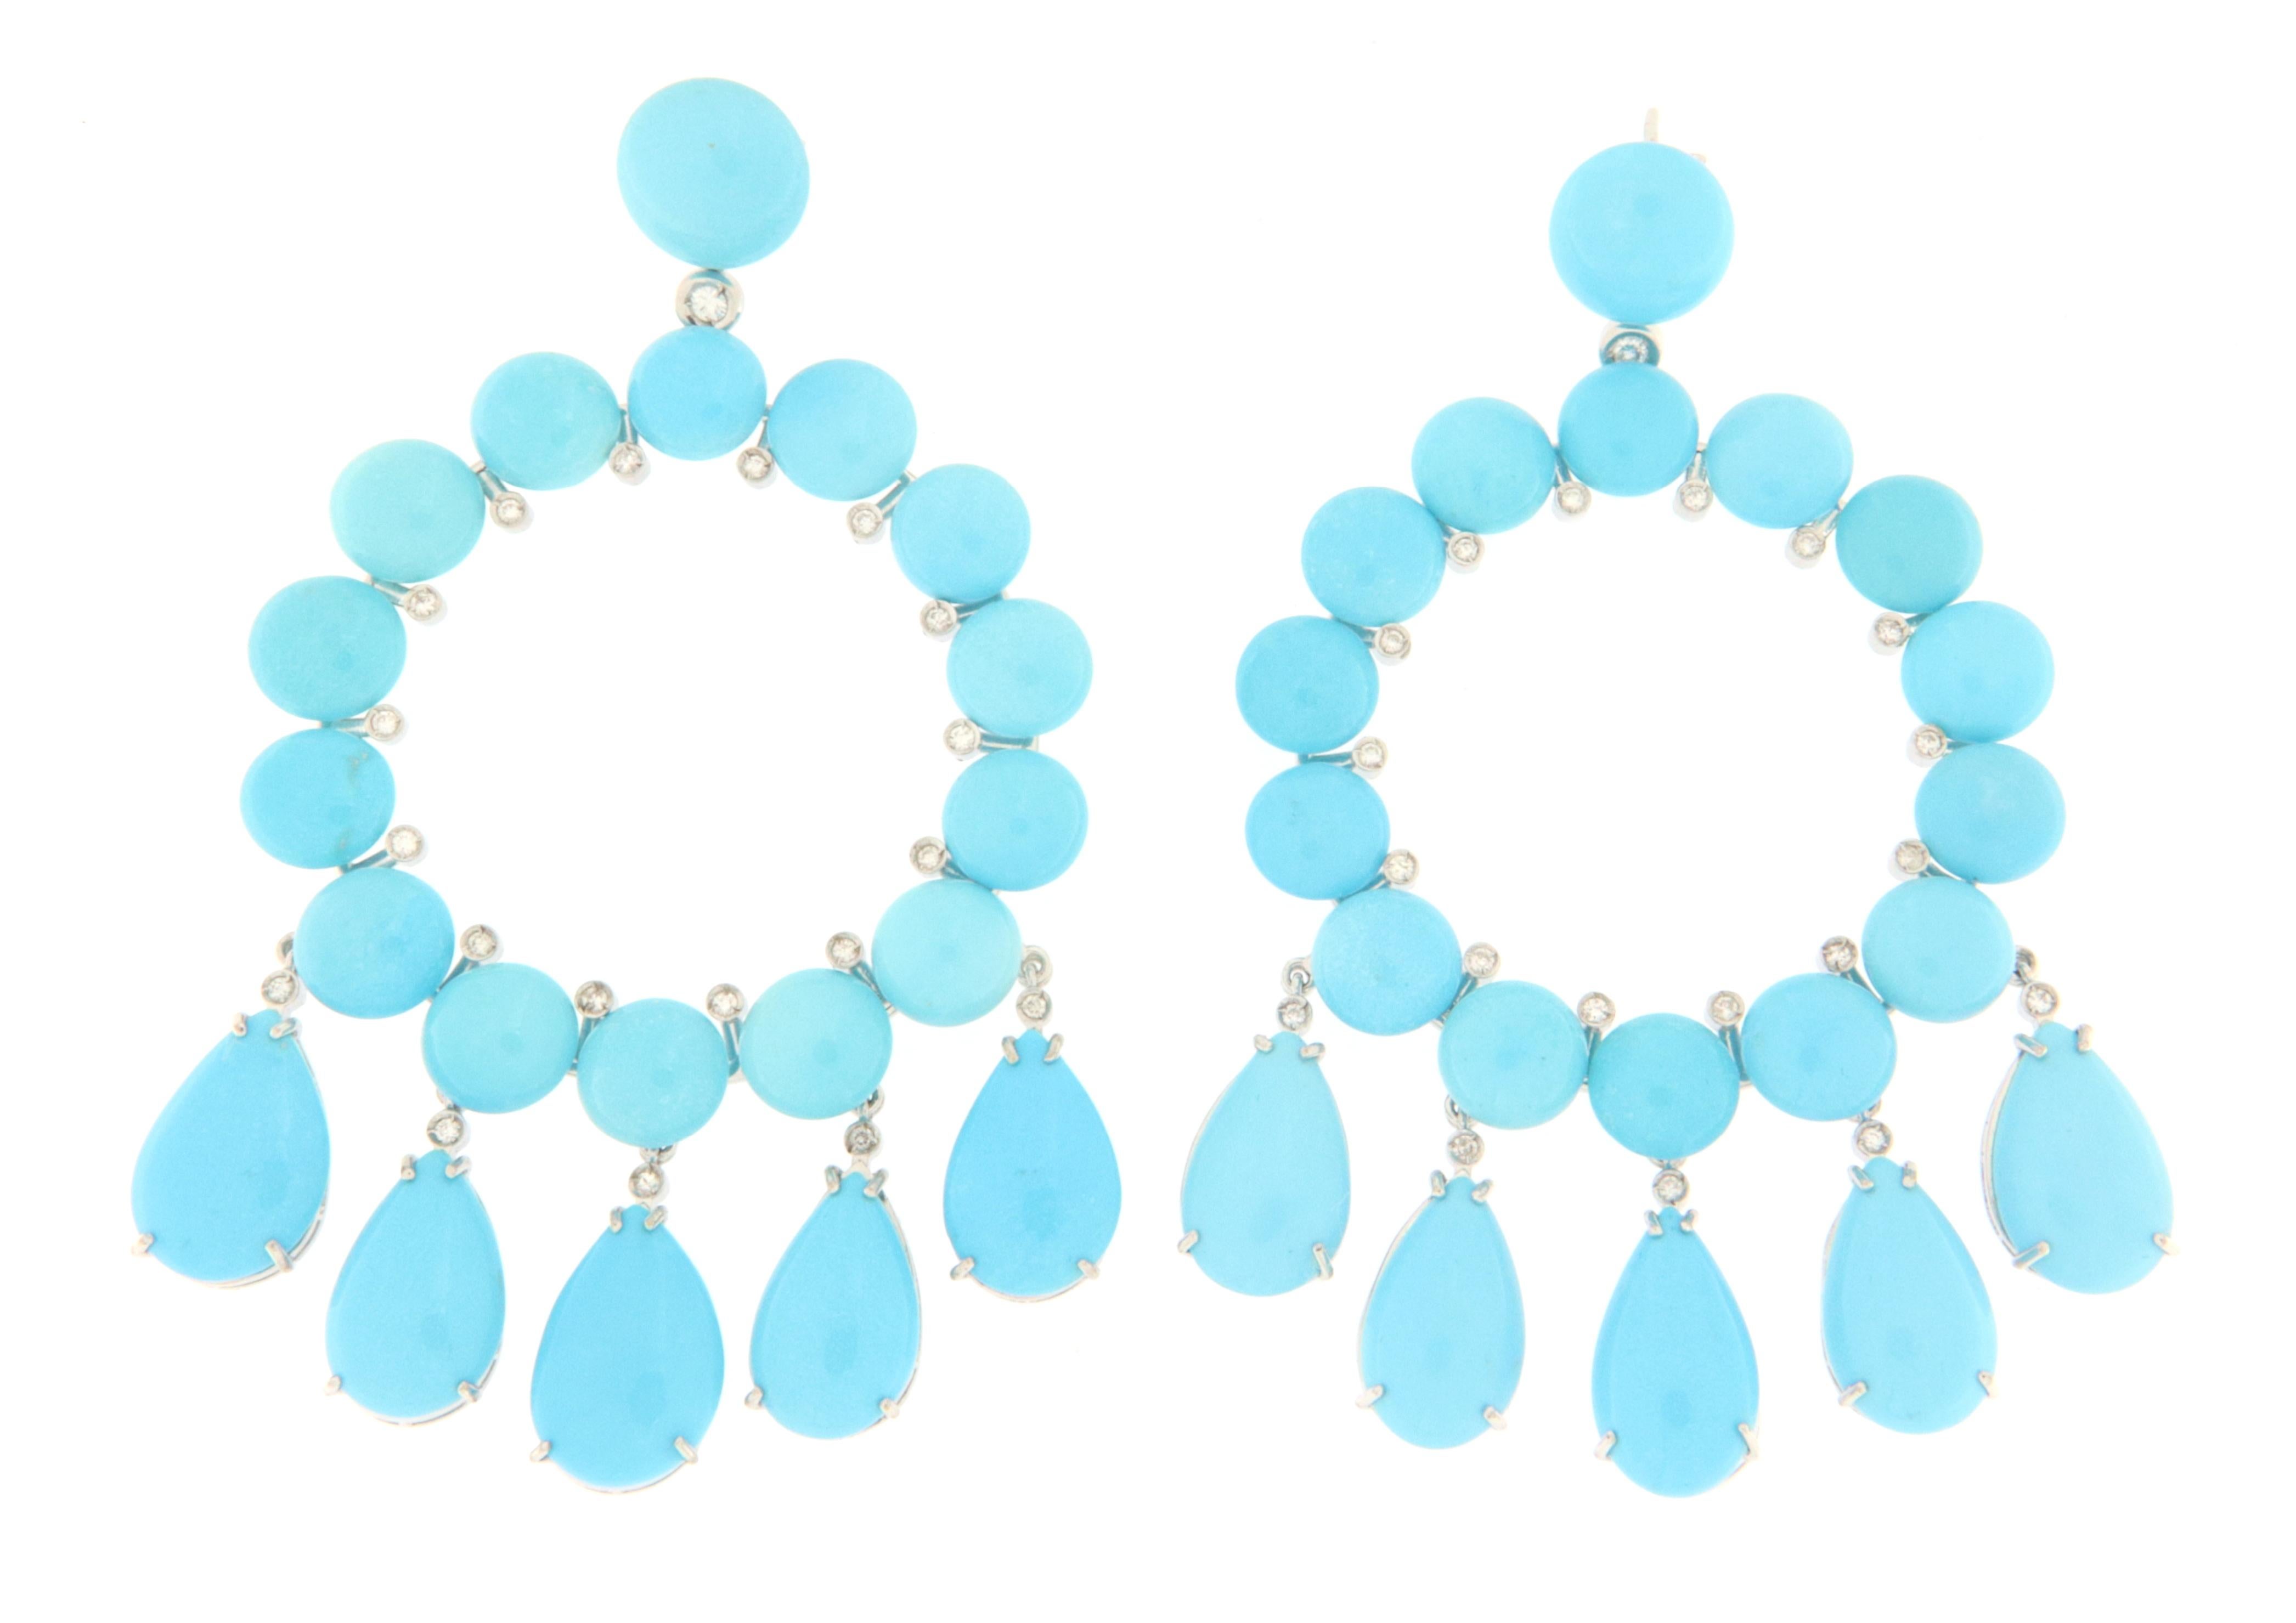 Fantastic earring made entirely by hand by expert master craftsmen. Made of 18 Karat white gold with natural diamonds and turquoise.
An earring to be exhibited on any occasion, simple but at the same time very impactful, in short, a jewel that a